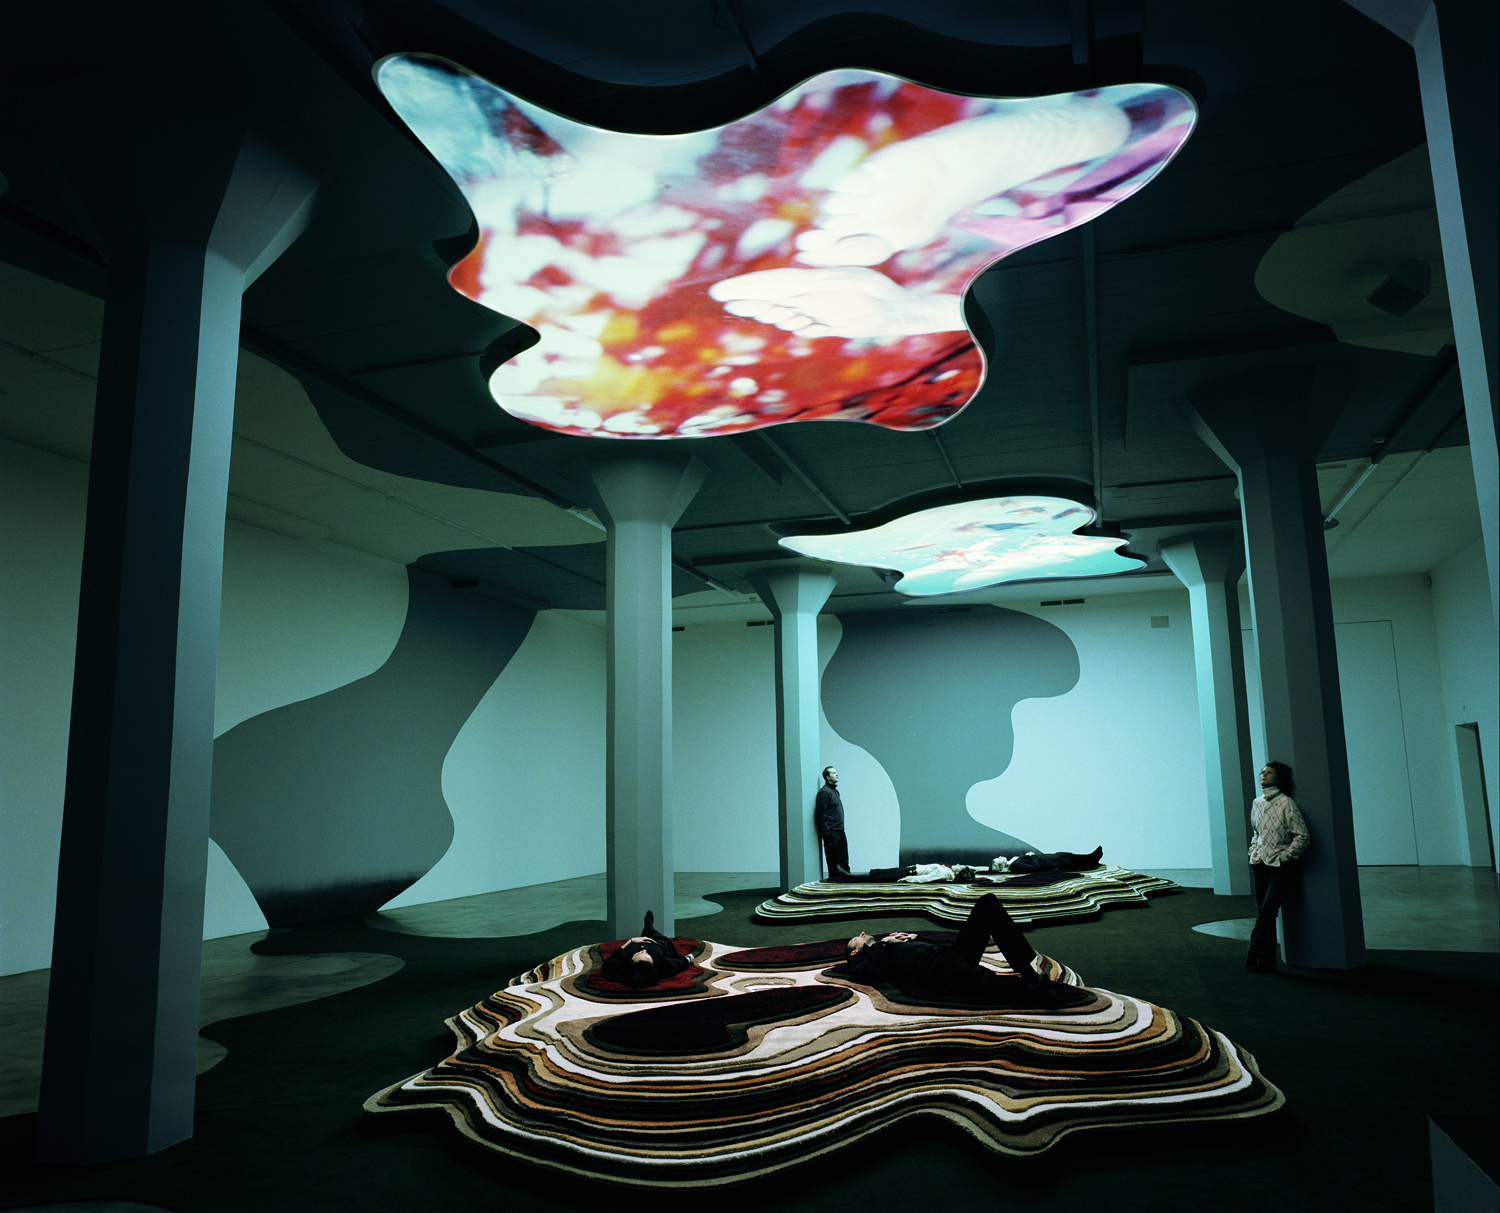 Pipilotti Rist 'Gravity, Be My Friend' installation view, 2007 © Magasin 3